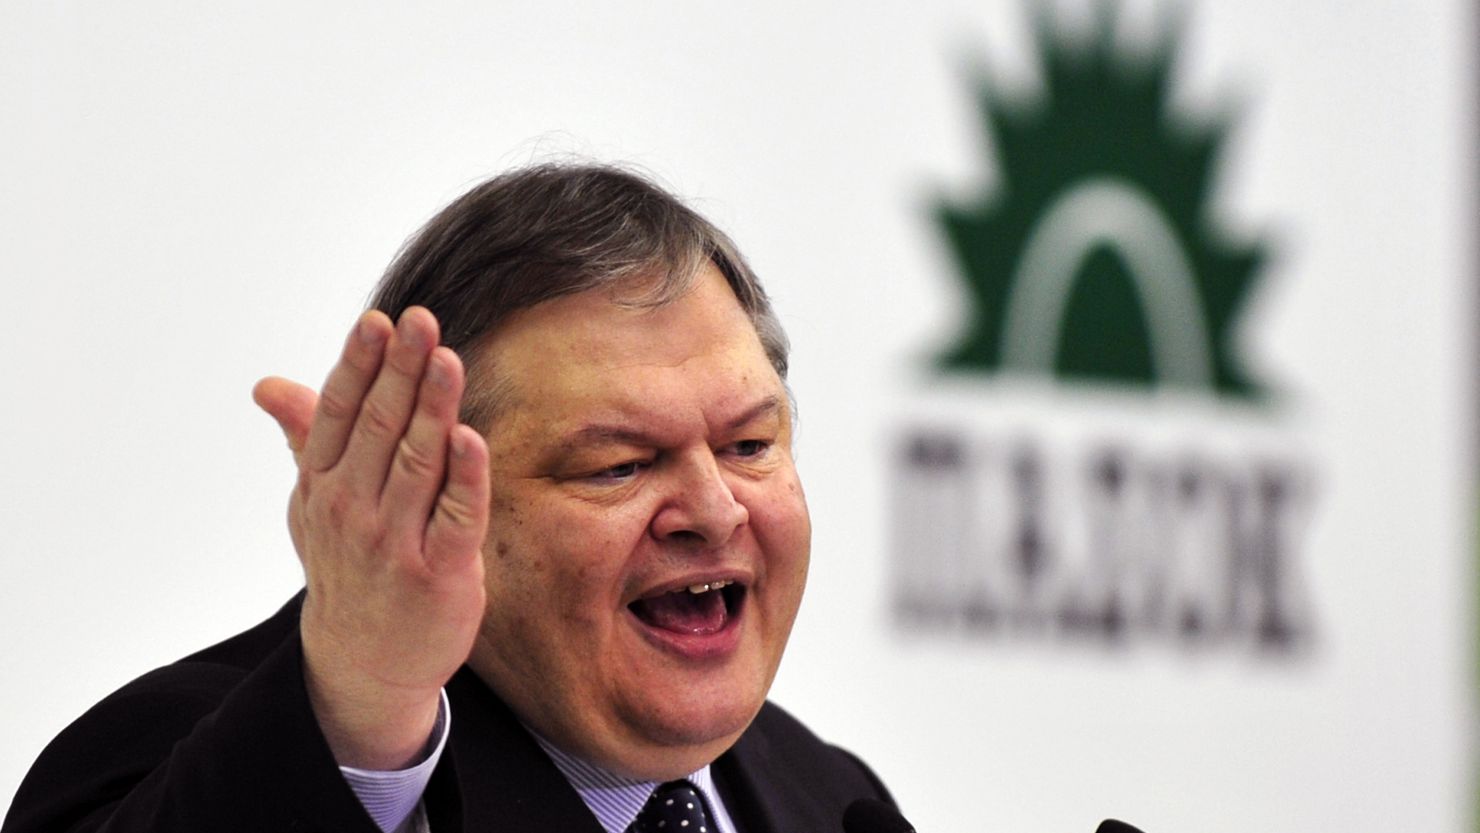 Socialist PASOK leader Evangelos Venizelos was the third Greek politician since Sunday tasked with forming a new government.